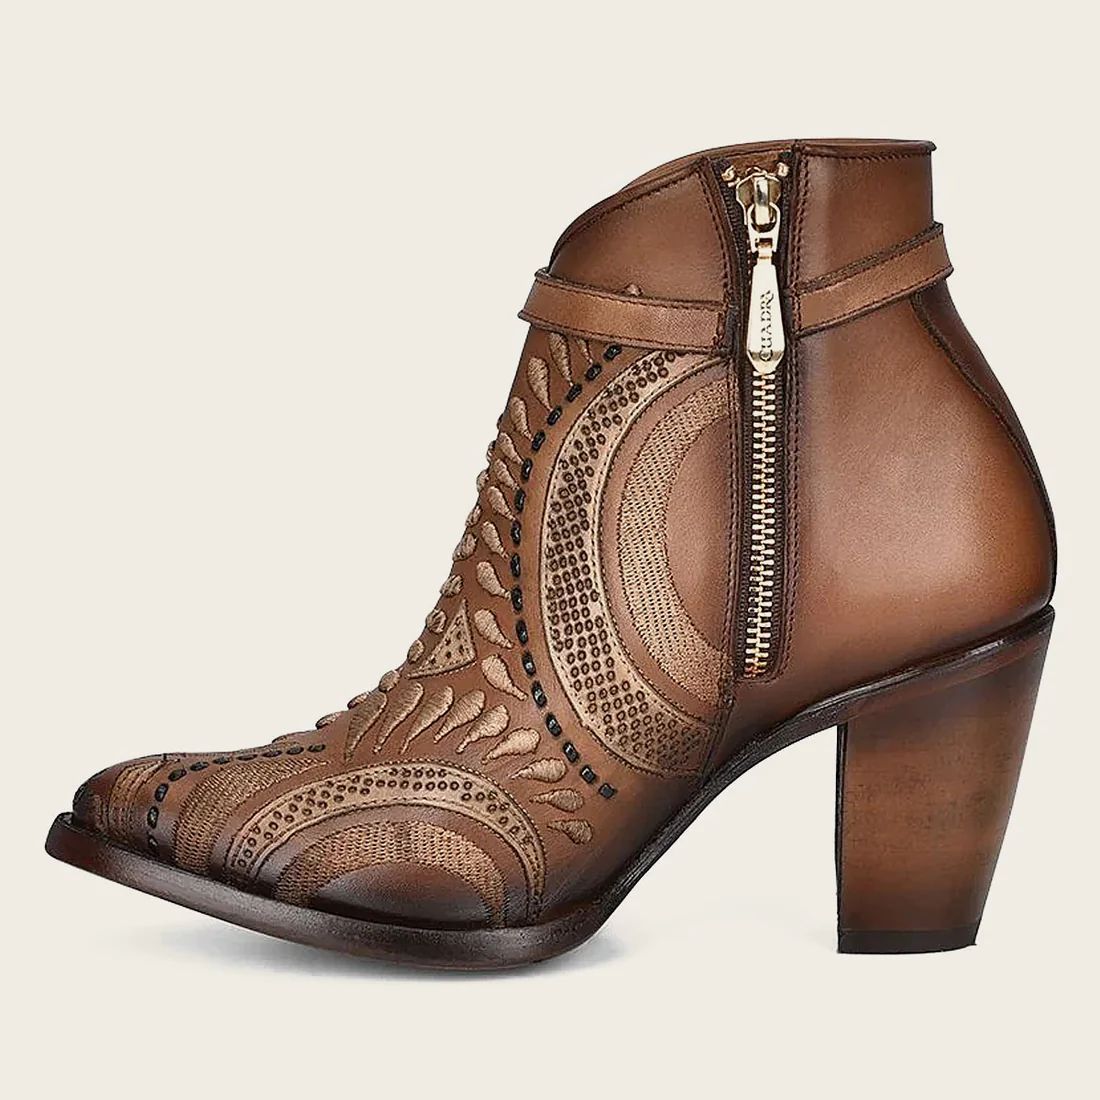 Cuadra | Embroidered And Perforated In Geometric Motifs Honey Leather Bootie